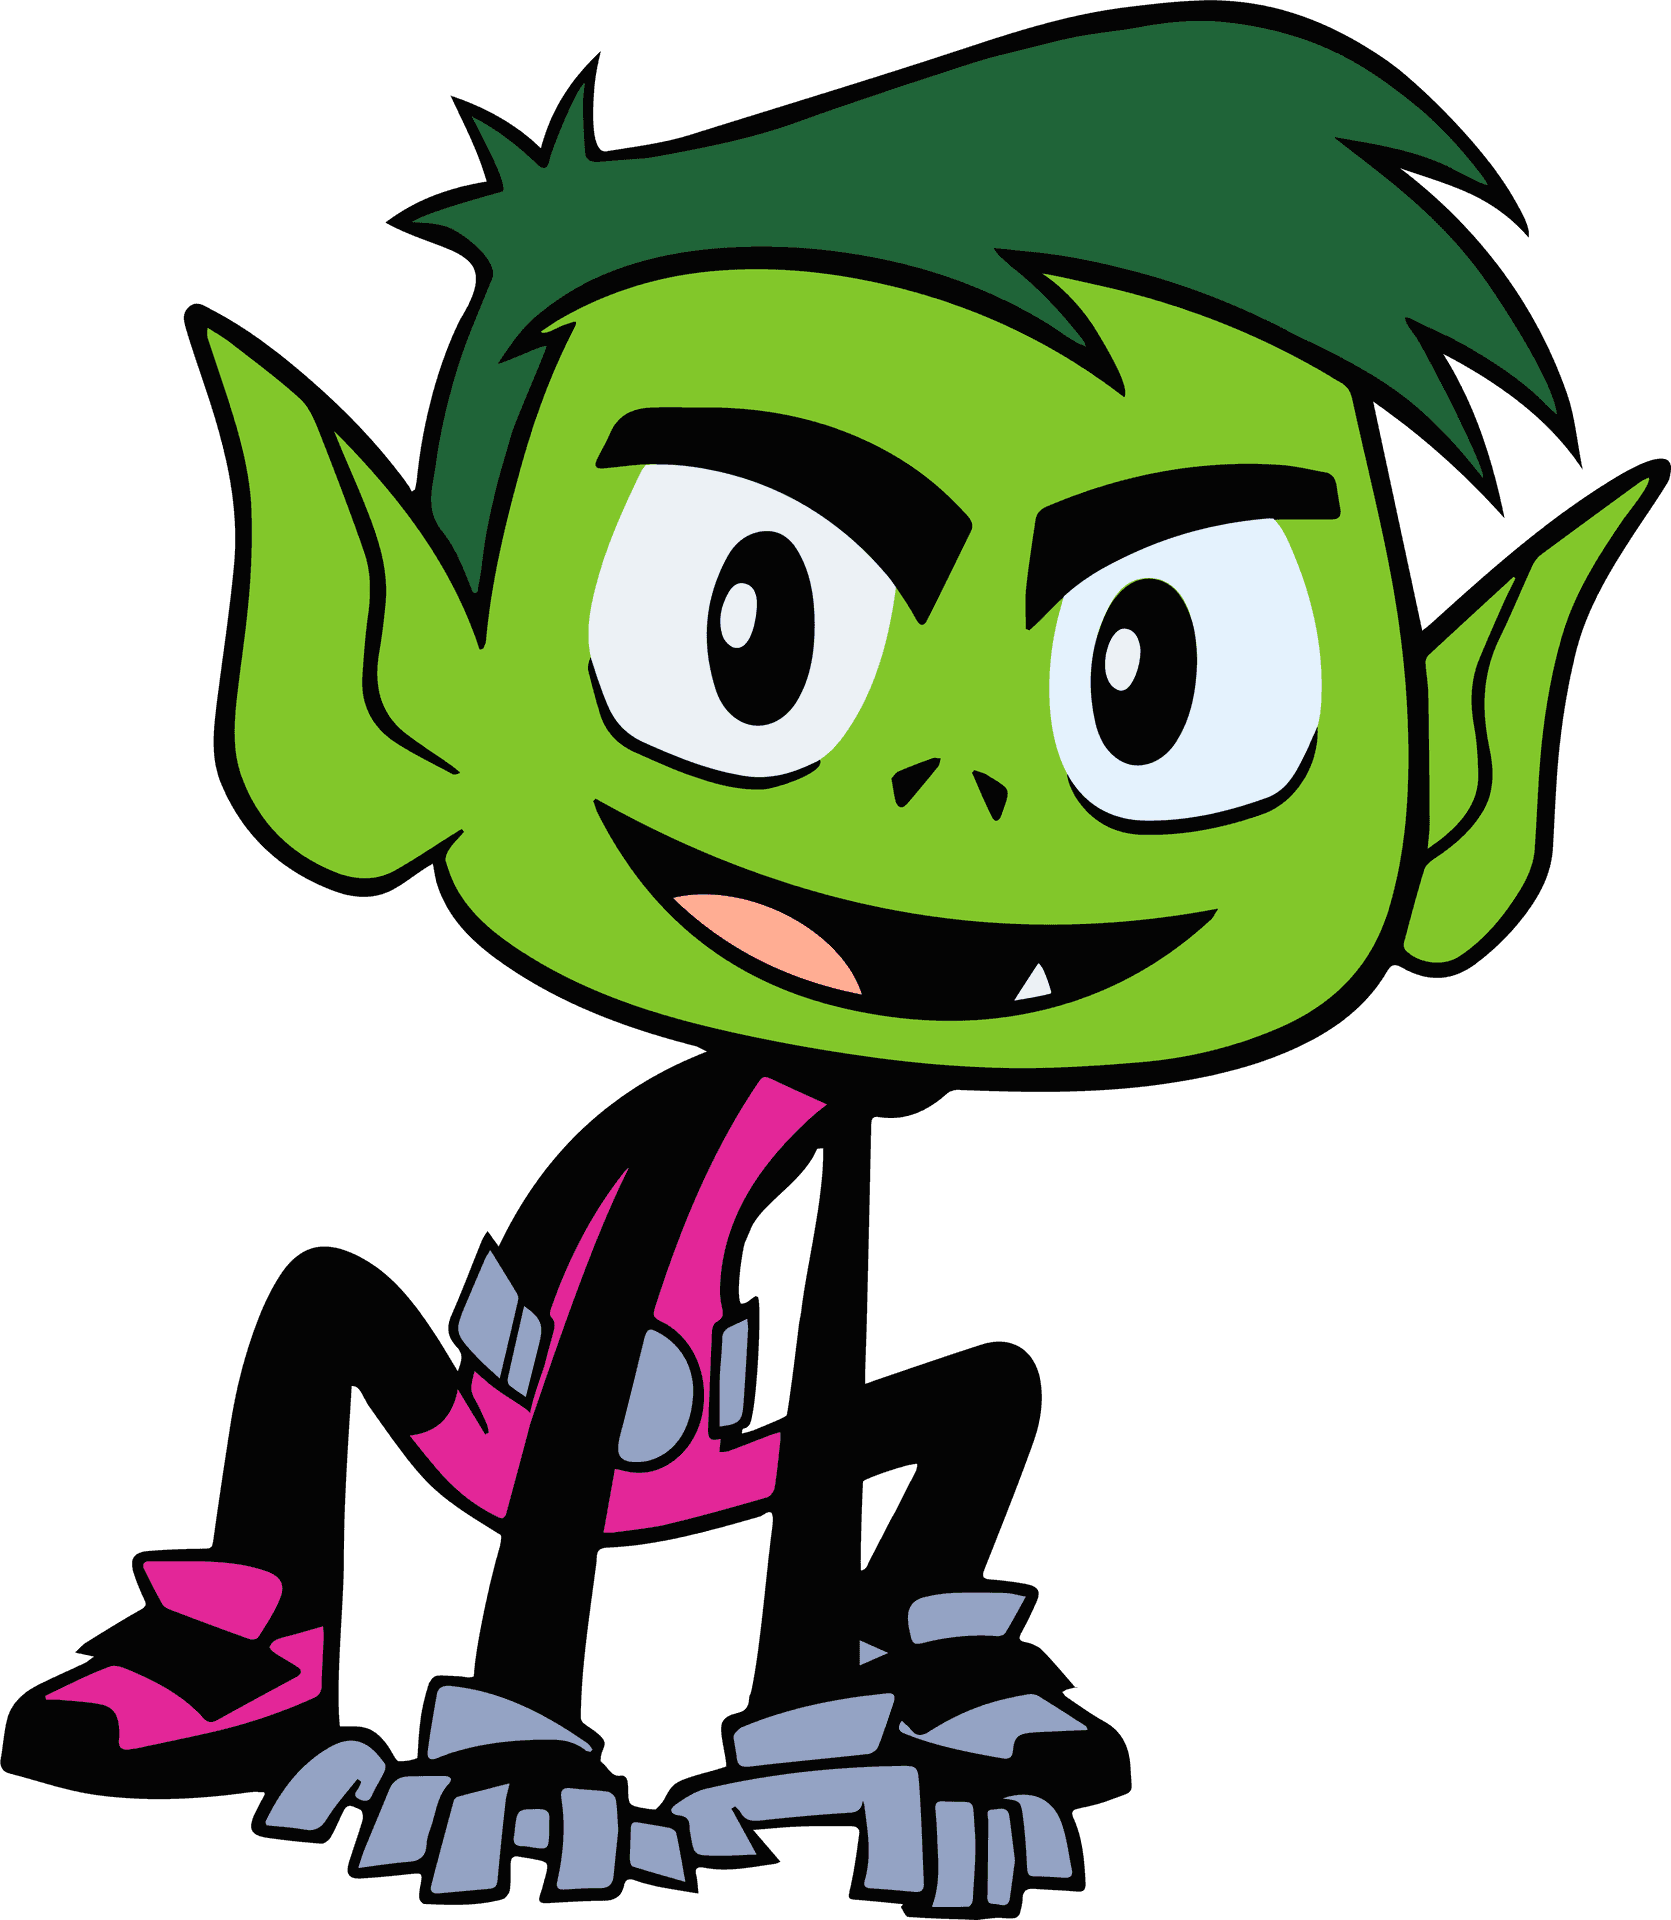 Green_ Animated_ Teen_ Character PNG image